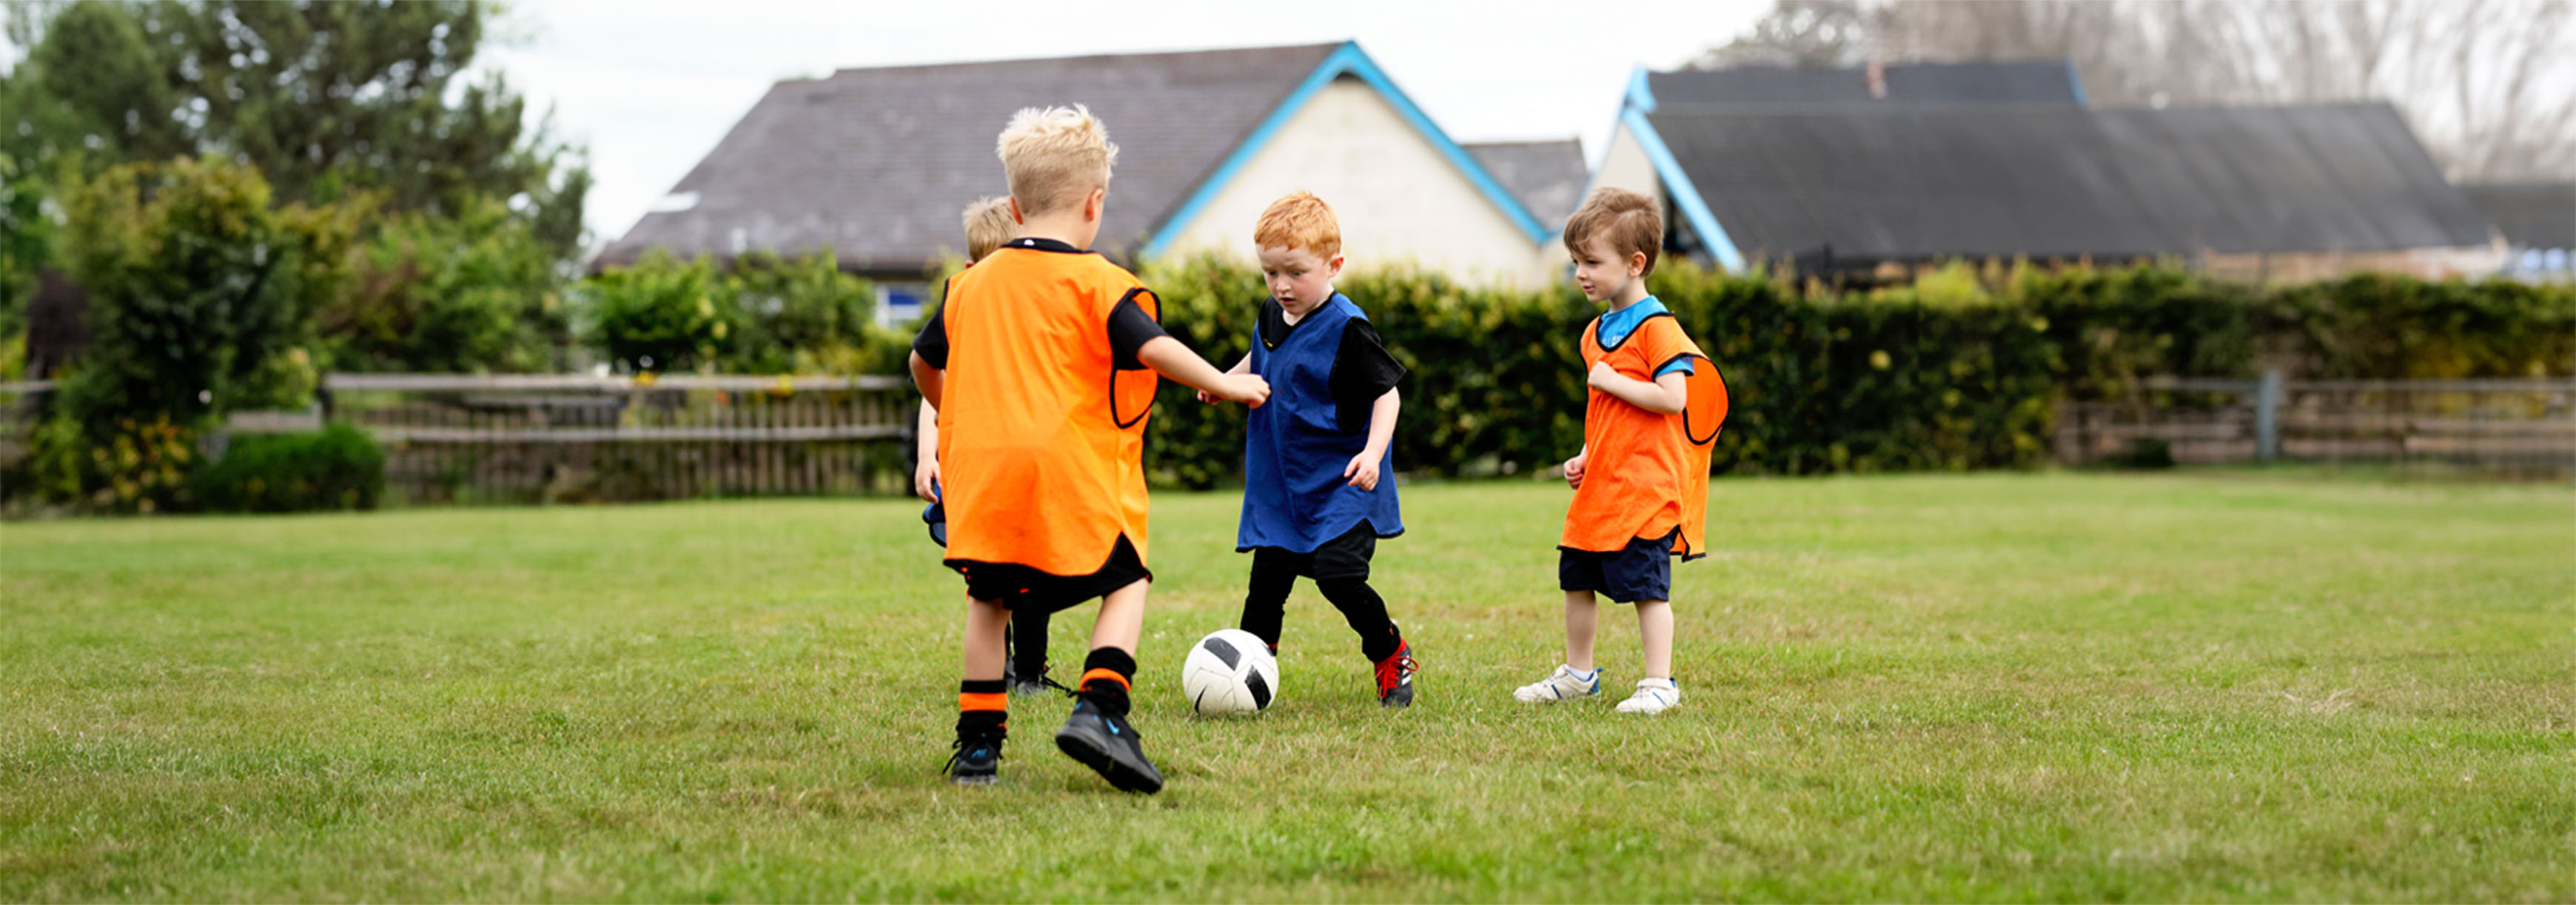 A group of four young children play football. One is kicking the ball, wearing a blue bib, while a teammate and two opponents stand round him.